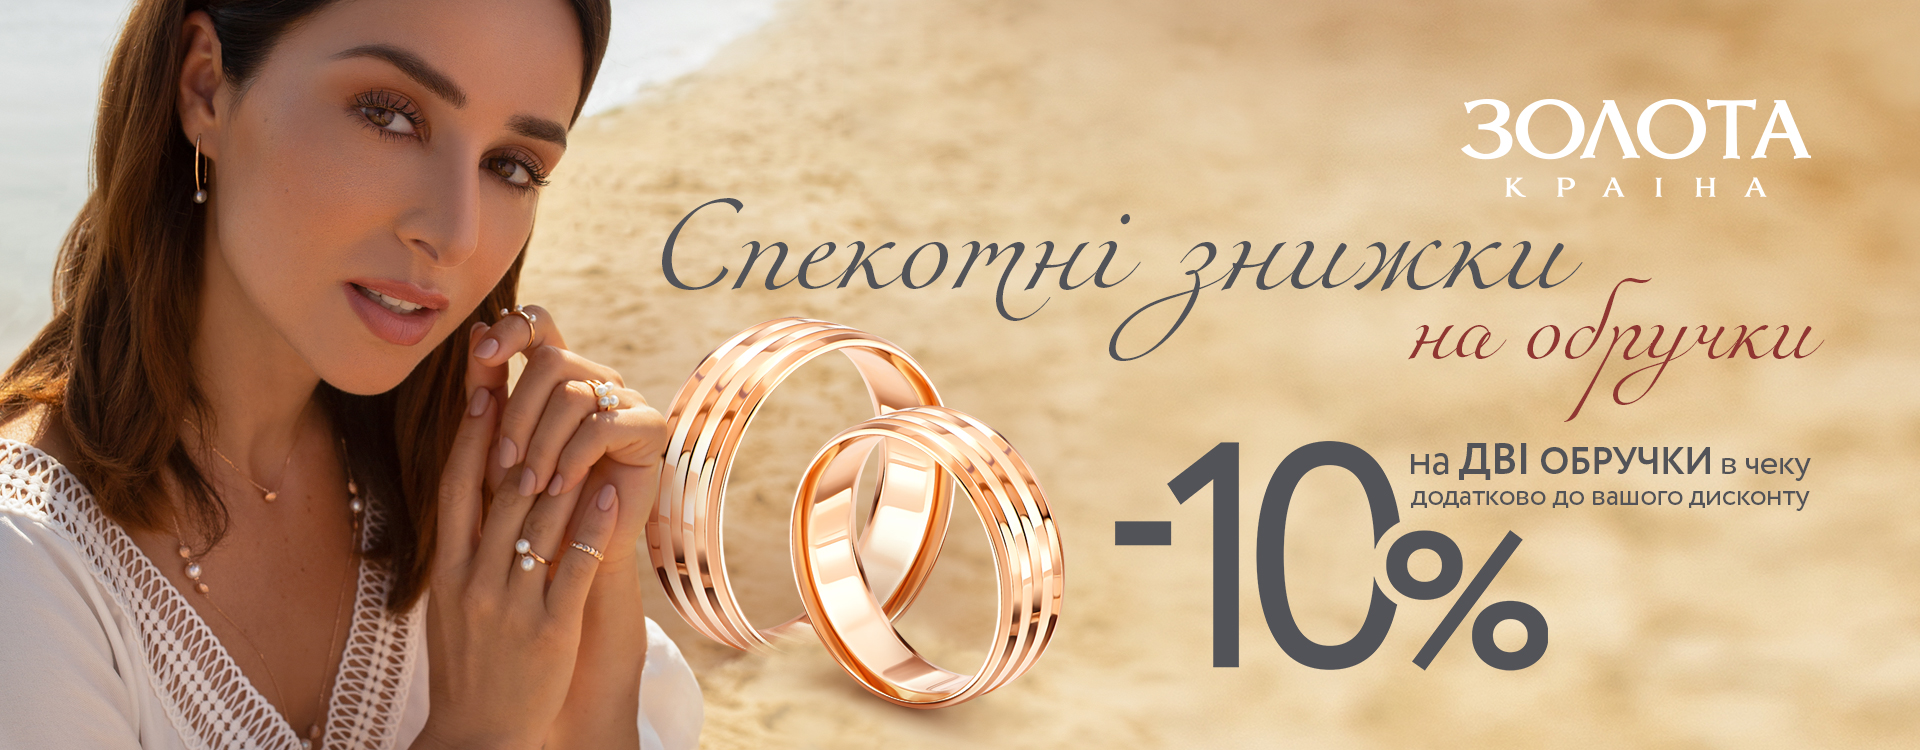 Additional 10% discount on engagement rings